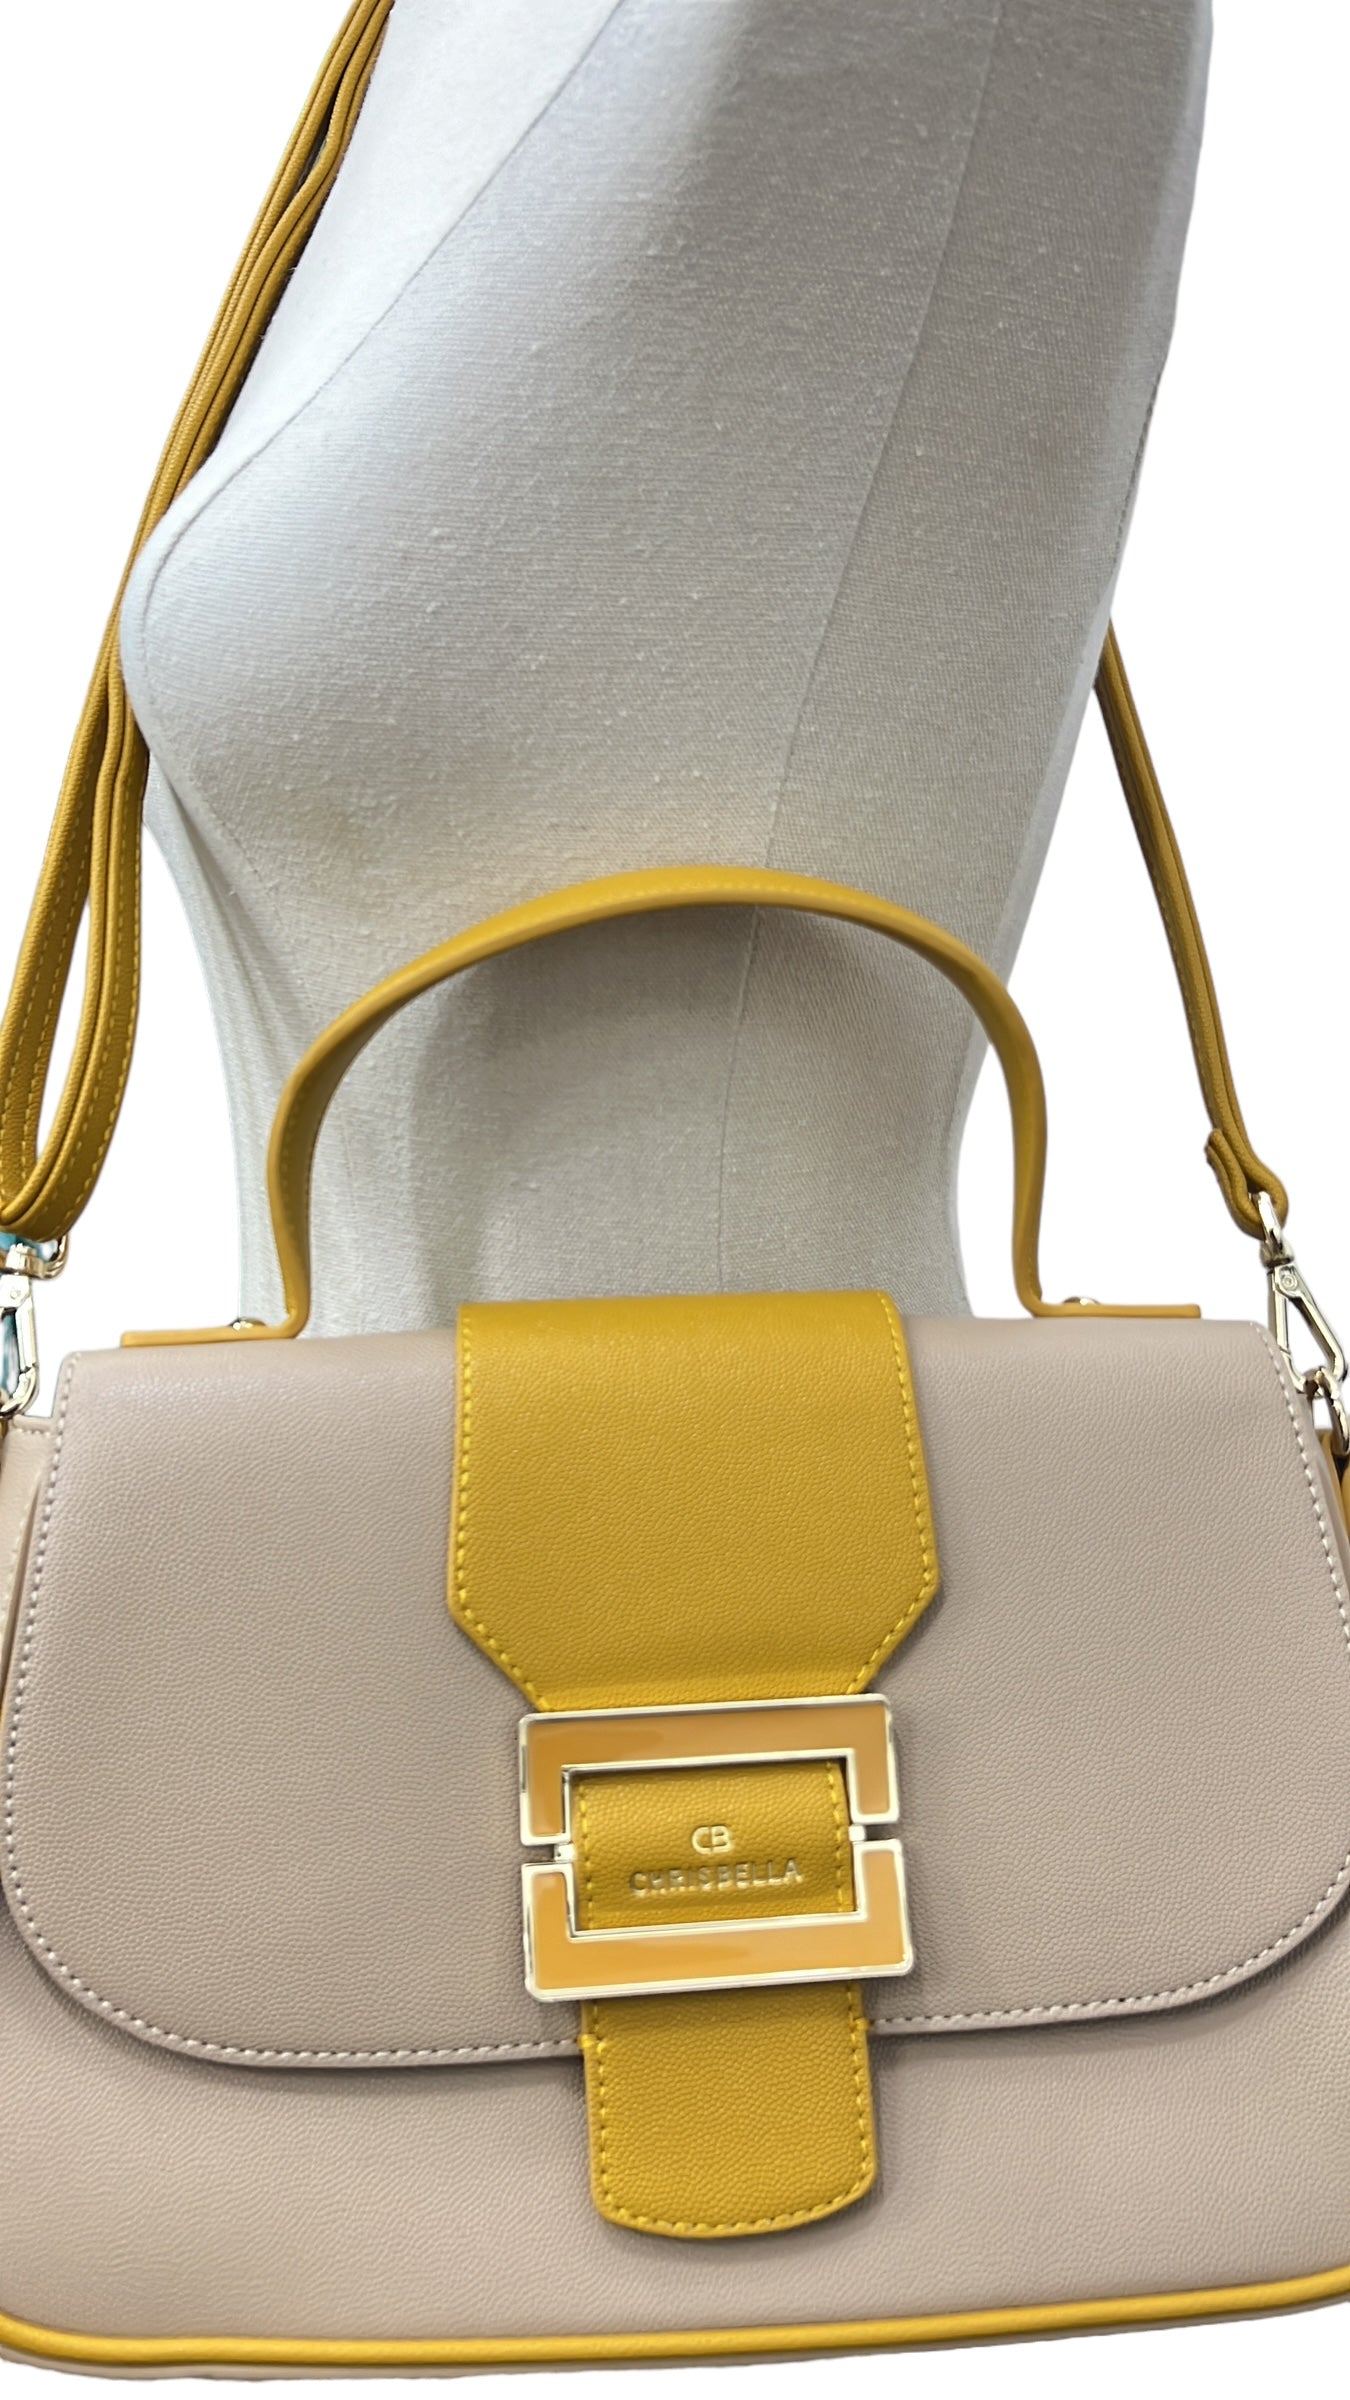 CHRISBELLA TEXTURED BUCKLE DETAIL TWO-TONE BAG IN BEIGE